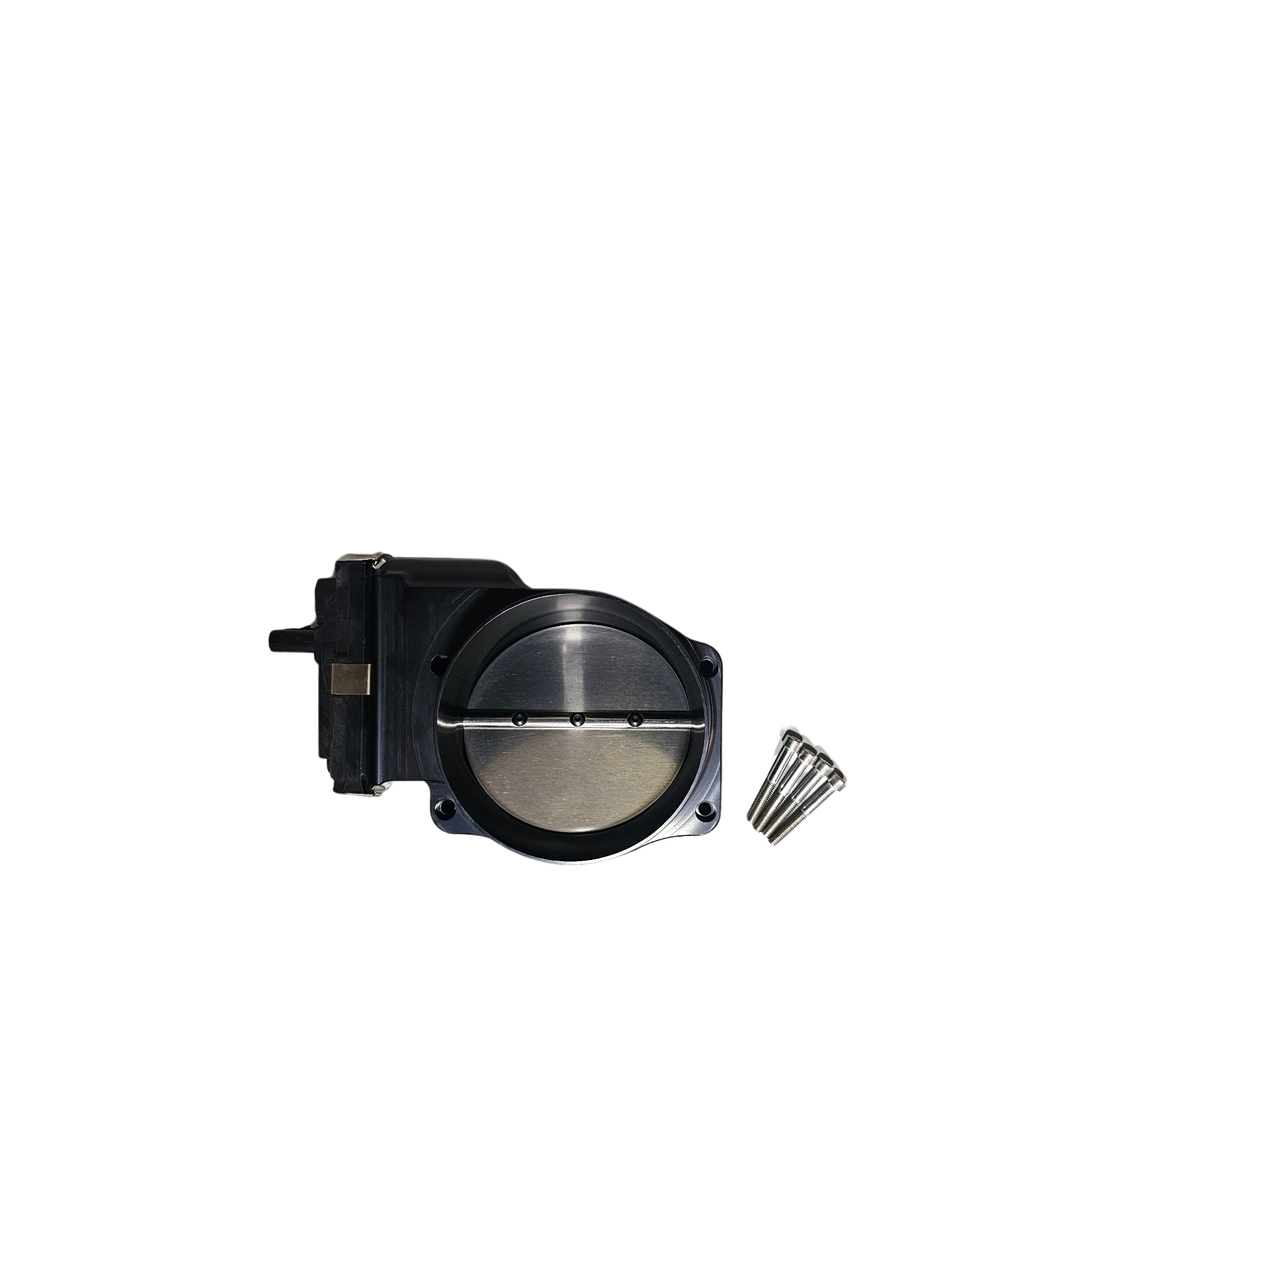 NICK WILLIAMS 112MM ELECTRONIC DRIVE-BY-WIRE THROTTLE BODY FOR GEN V LTx (BLACK ANODIZED)